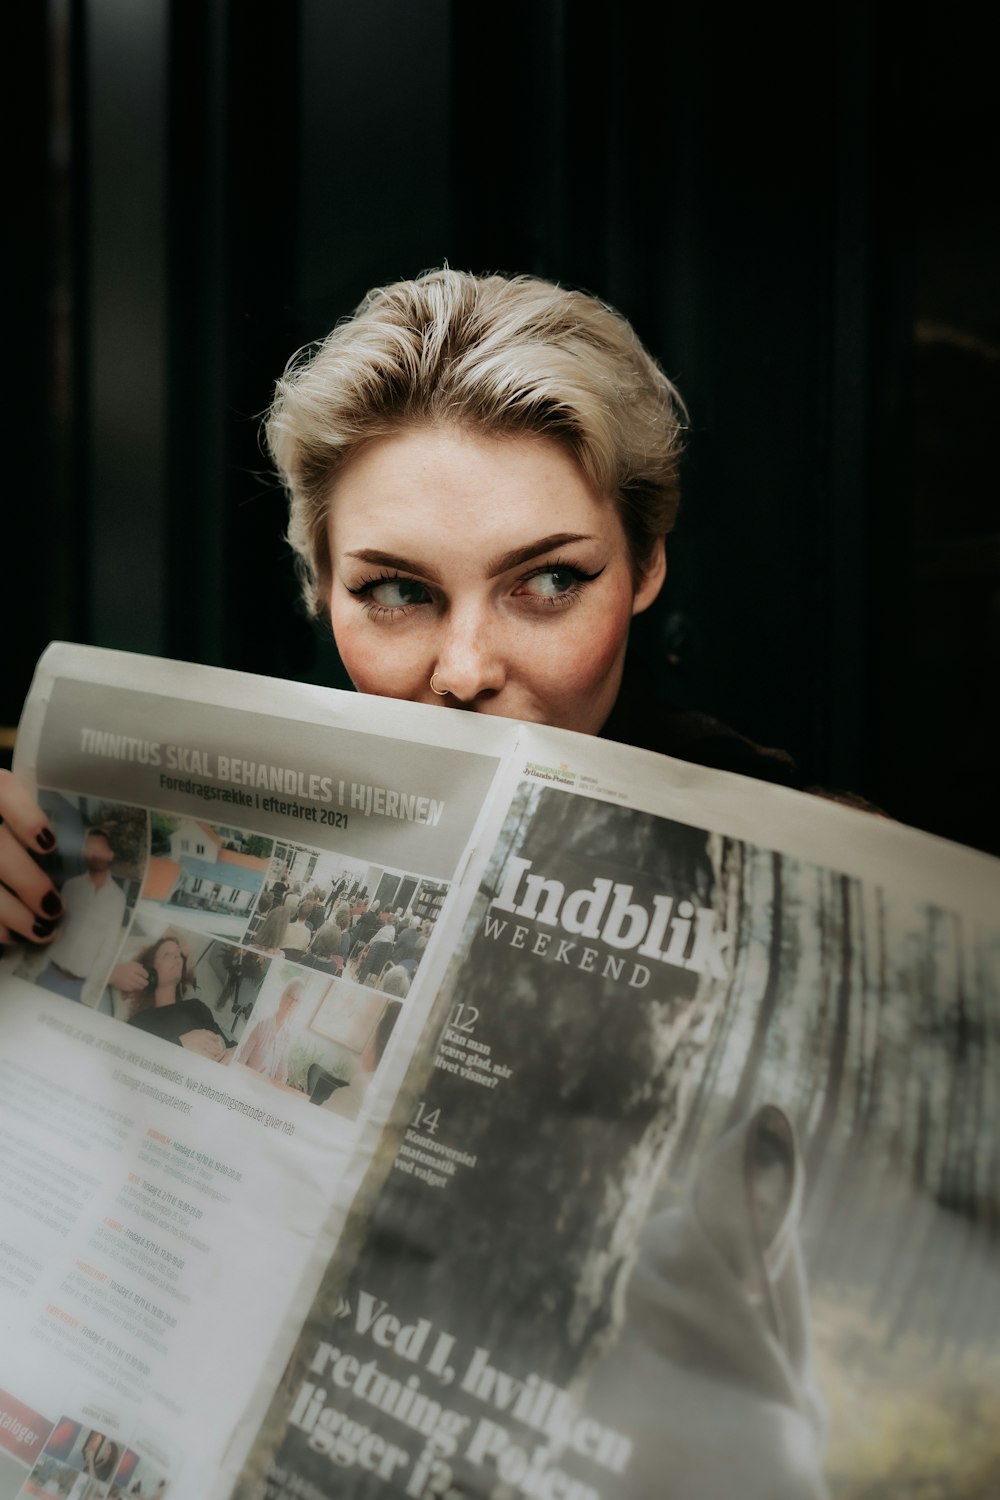 a woman reading a newspaper with her face close to the camera